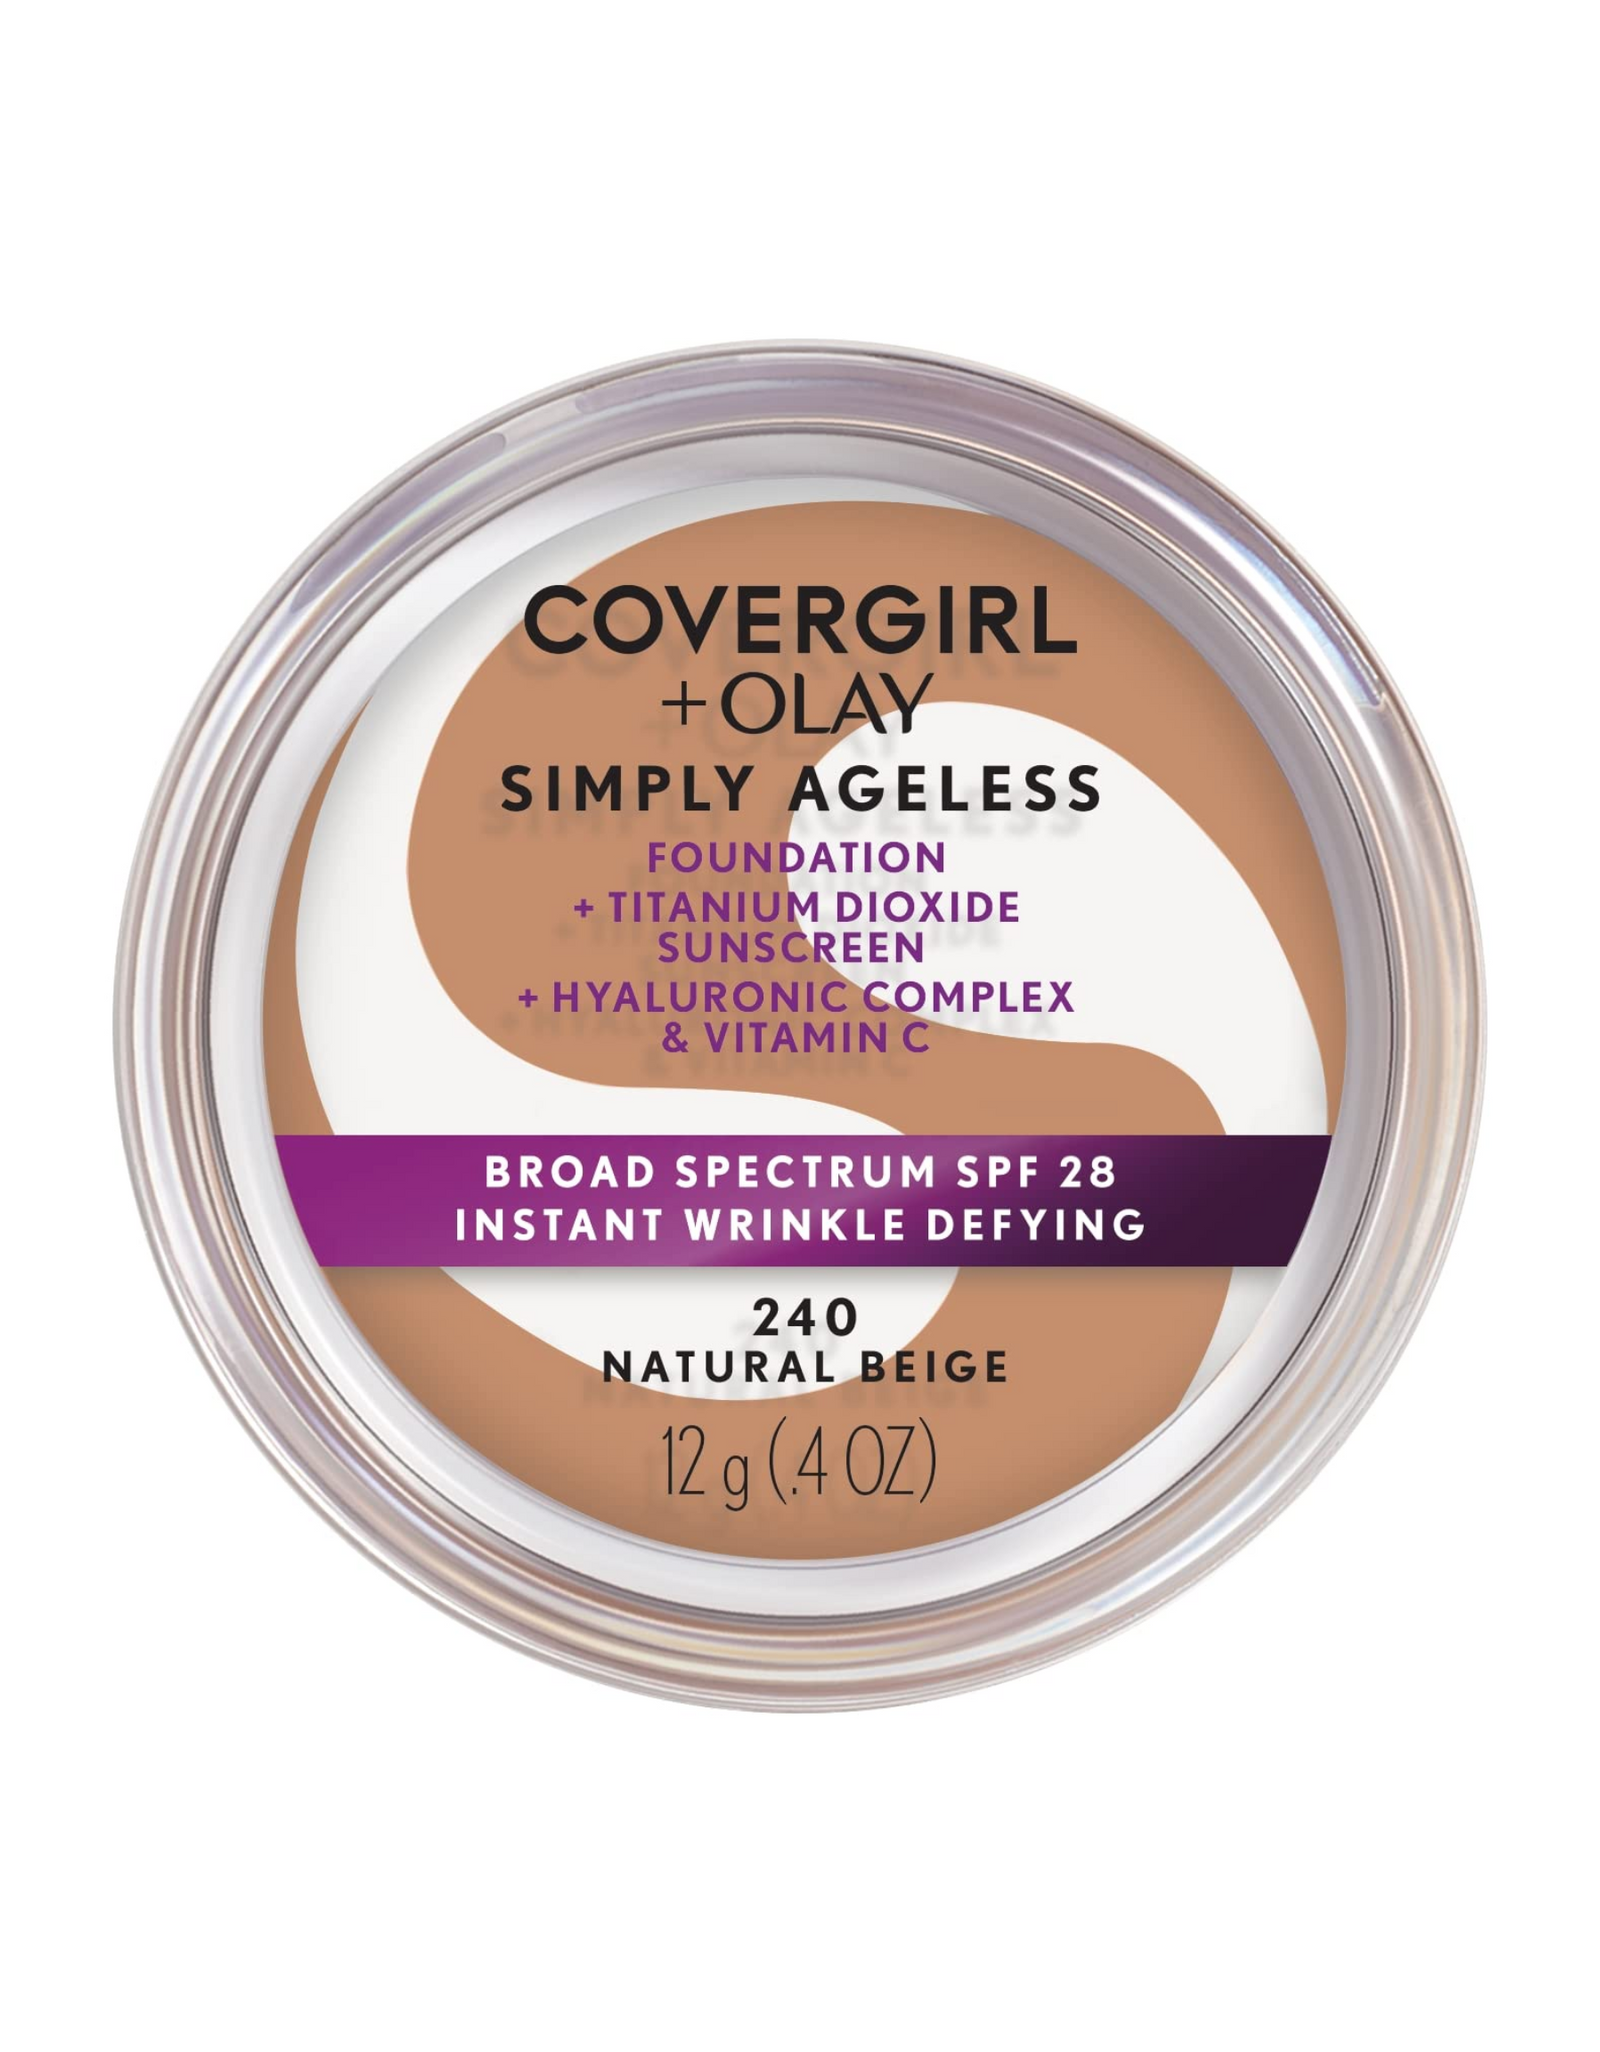 COVERGIRL & Olay Simply Ageless Foundation with Broad Spectrum SPF 28, Natural Beige, 0.44 oz